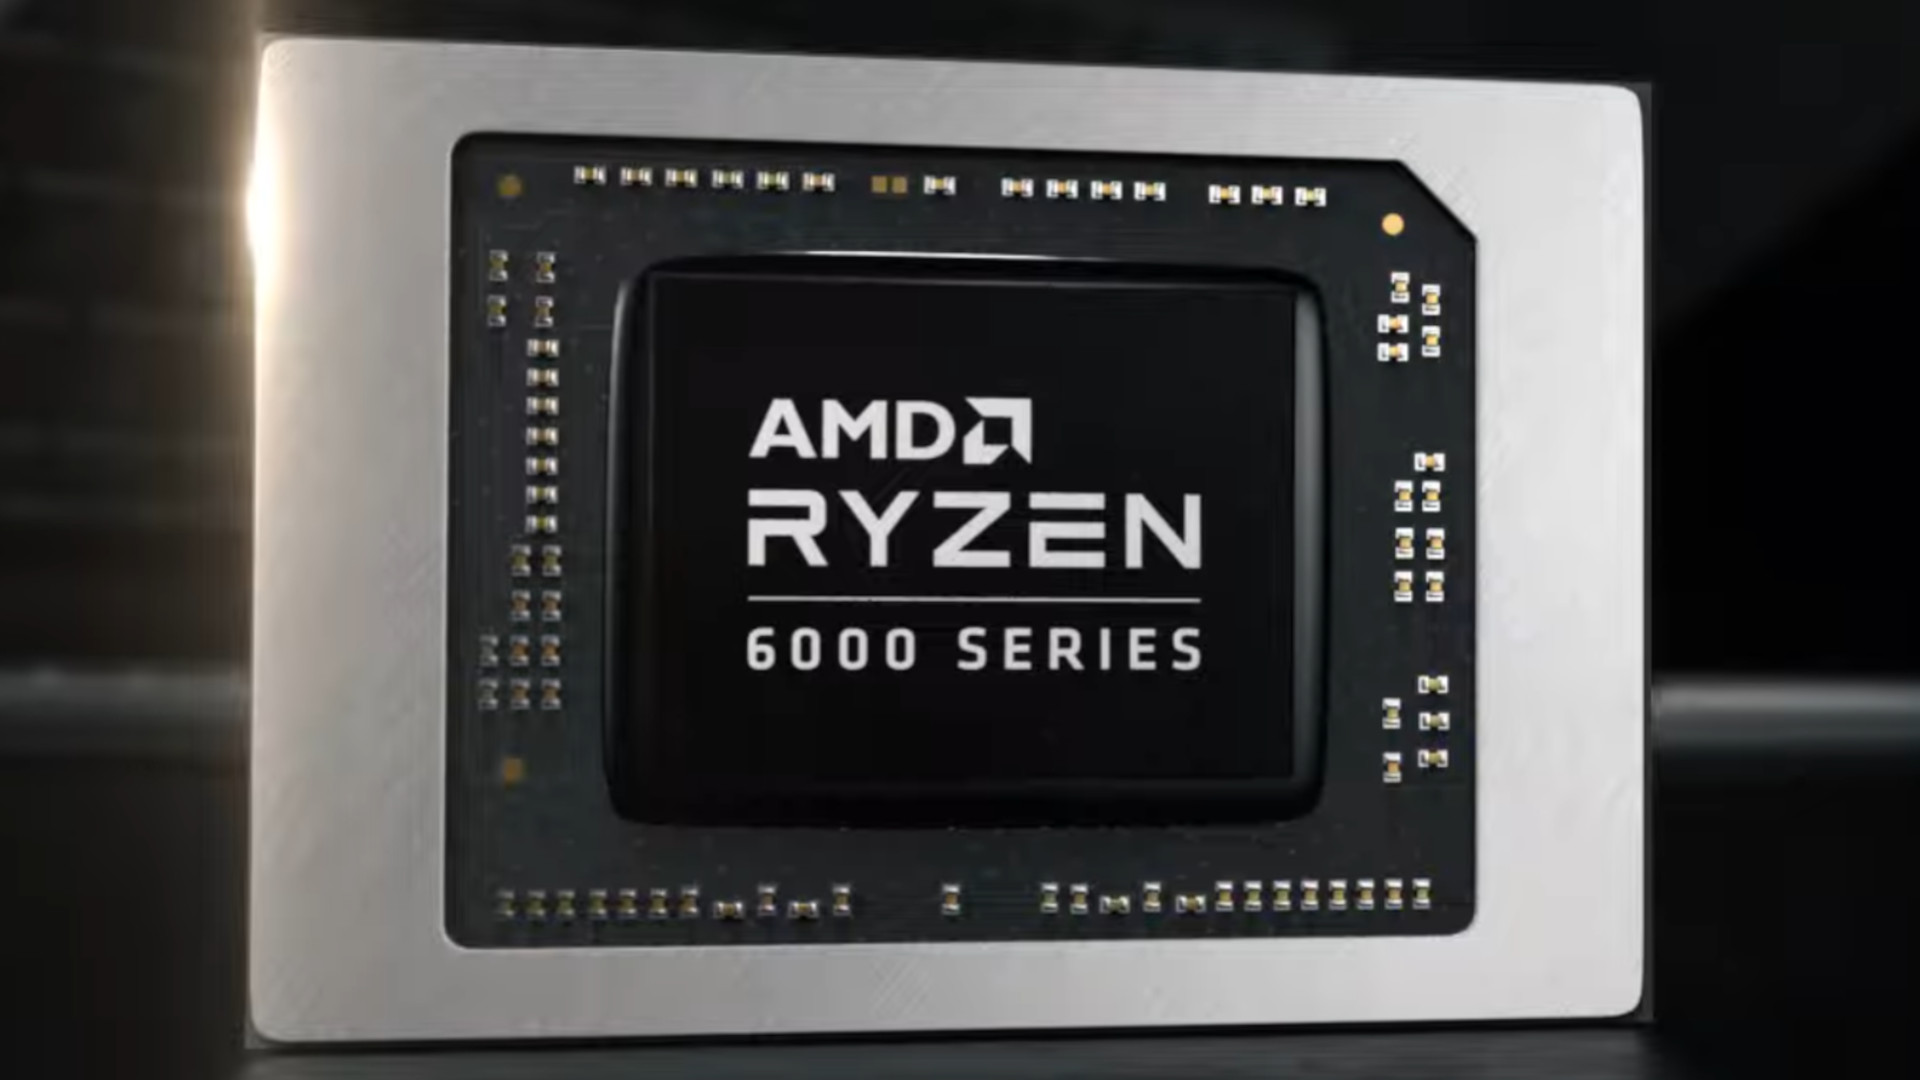 AMD Ryzen 9 6900HX is up to 32% slower than the Intel i9-12900H in Geekbench